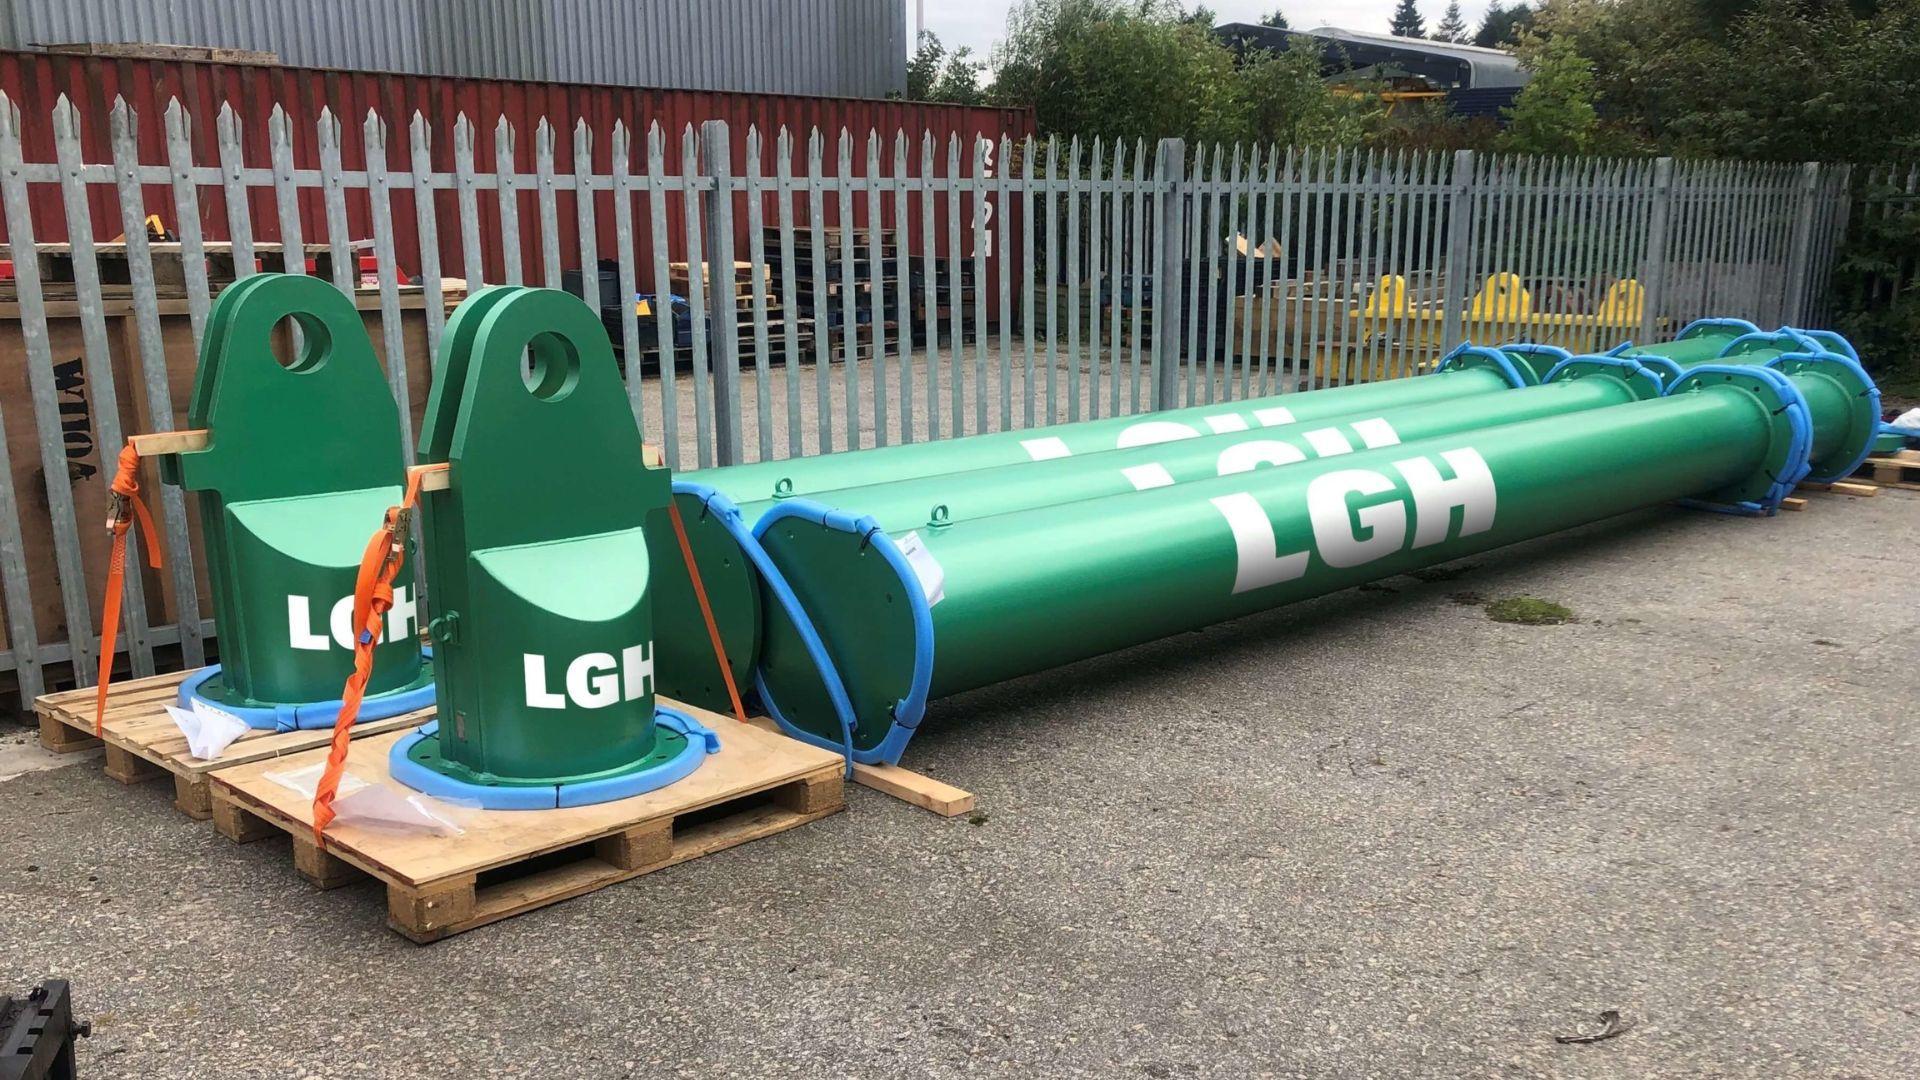 (Case Study) LGH Responds to Demand by Increasing Spreader Beam Availability with Latest MOD 400/600 Investment